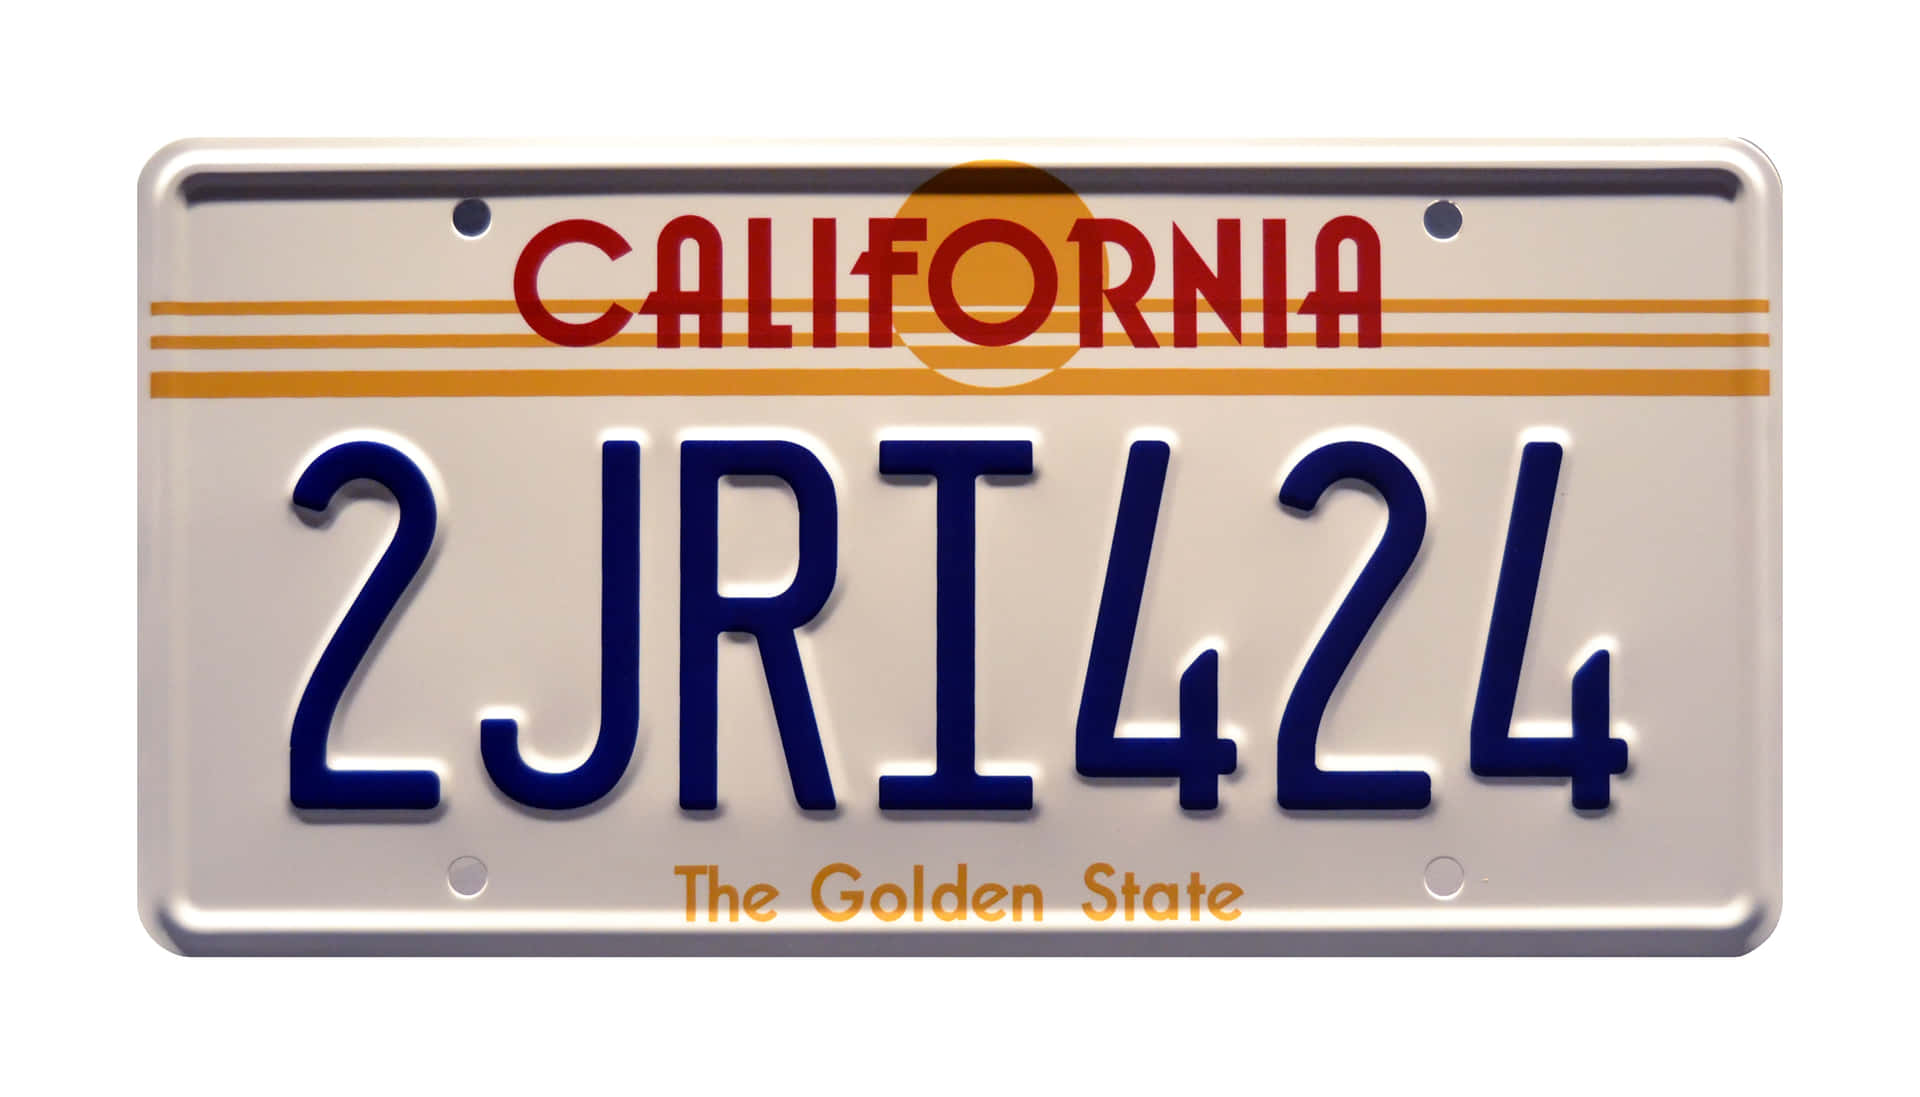 Car License Plate on Silver Vehicle Wallpaper